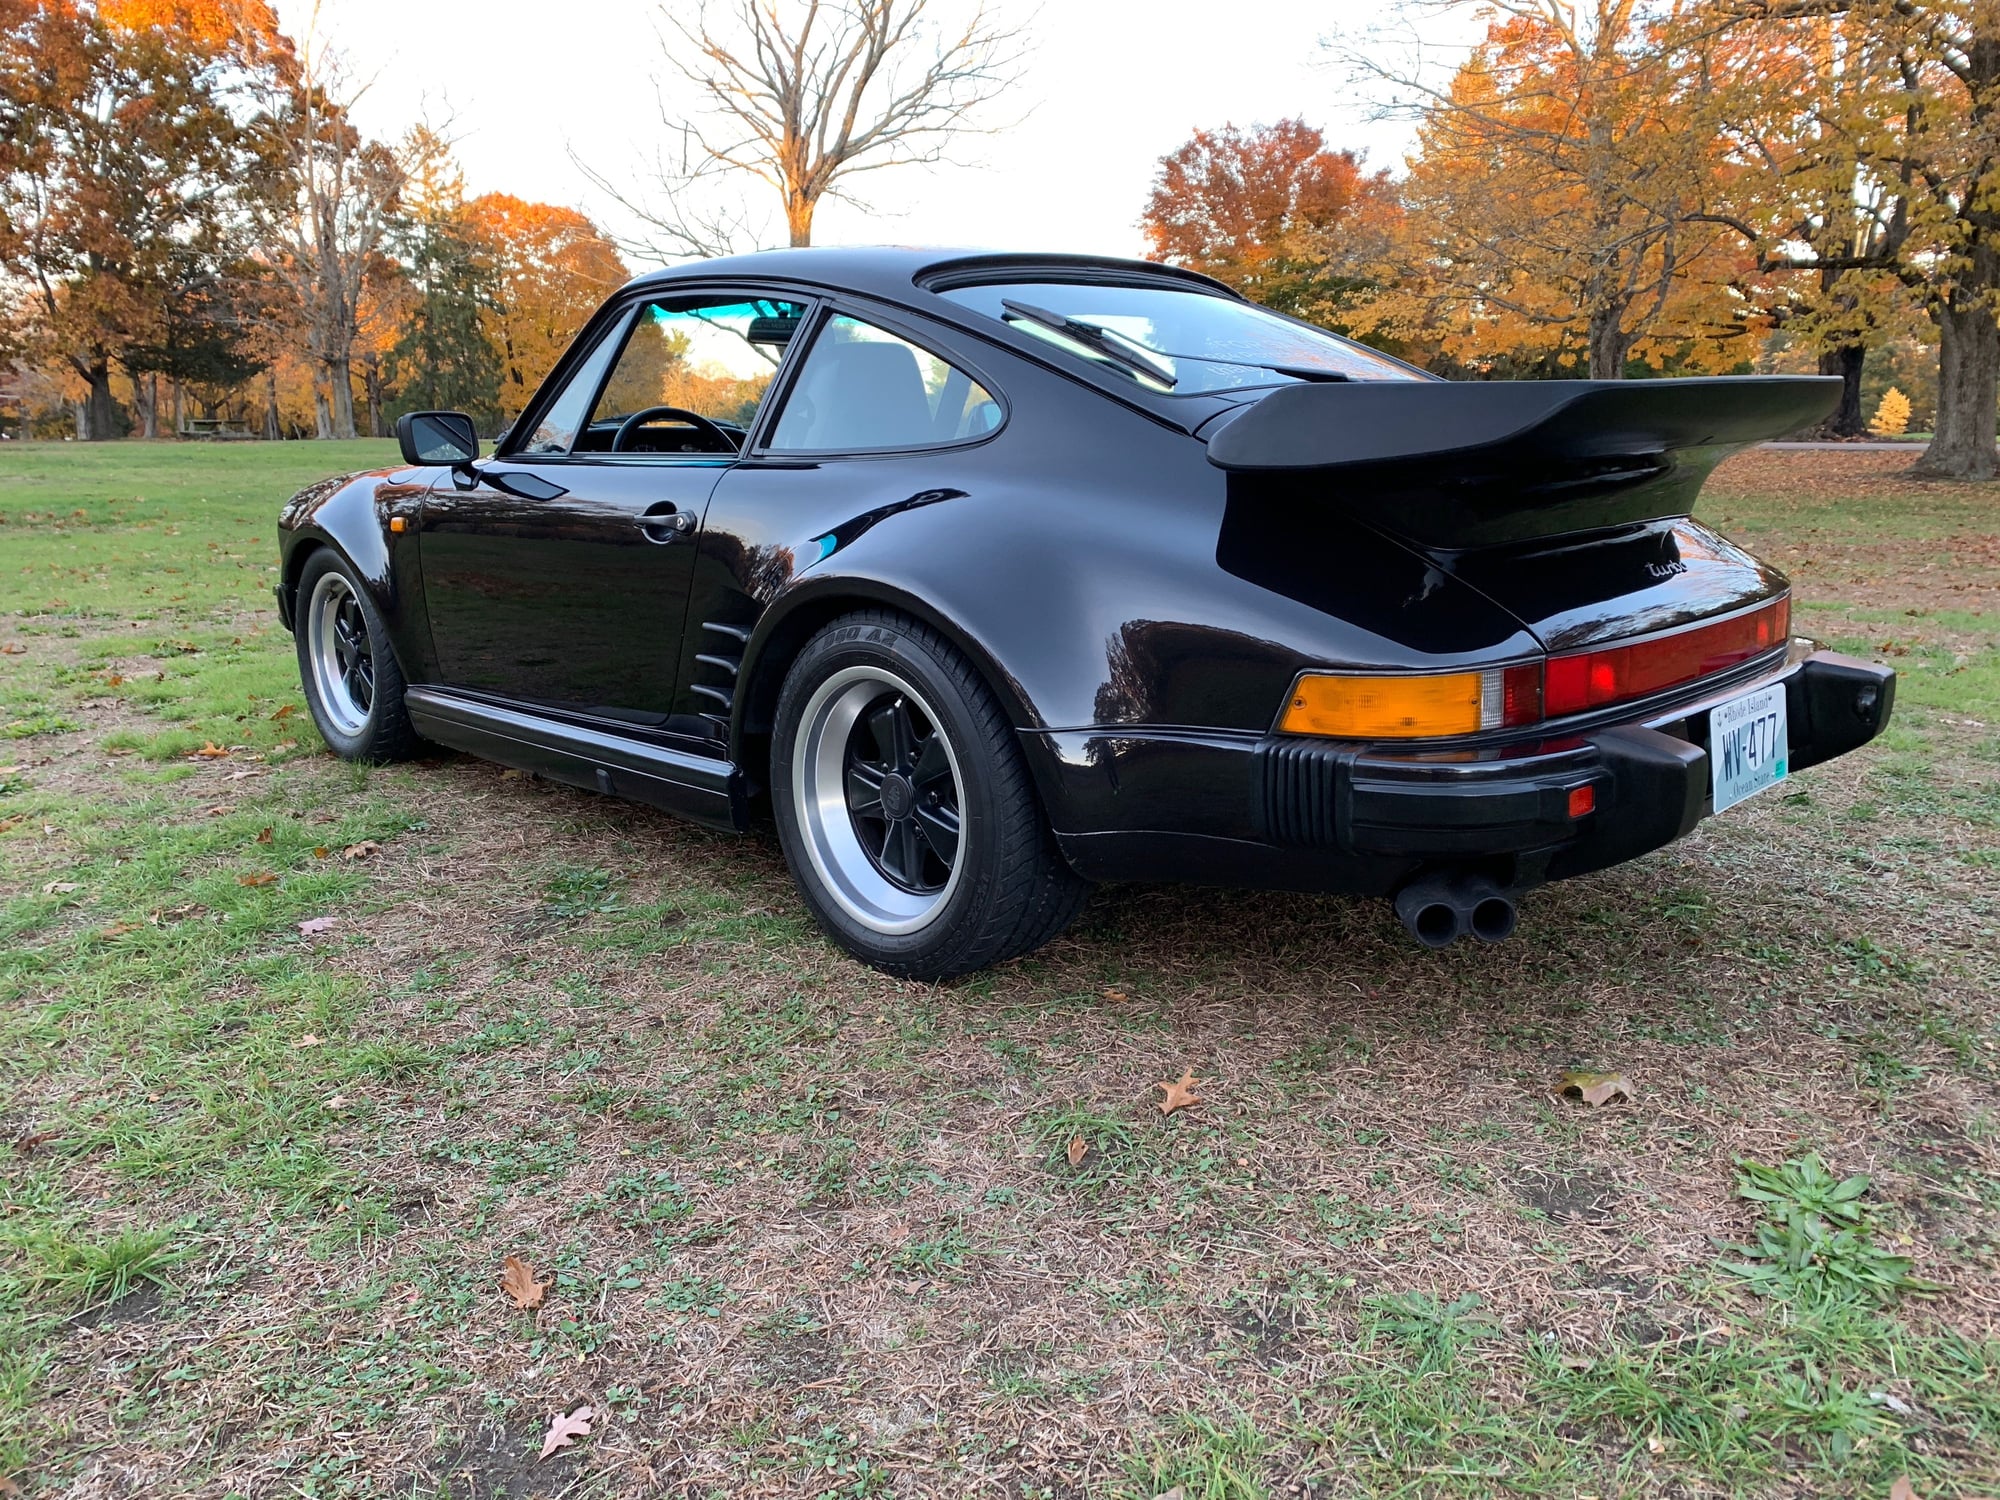 1984 Porsche 911 - 1984 Porsche 911 Turbo Indigo Black - Used - VIN WP000000000000000 - 53,226 Miles - 6 cyl - 2WD - Manual - Coupe - Other - East Greenwich, RI 02818, United States